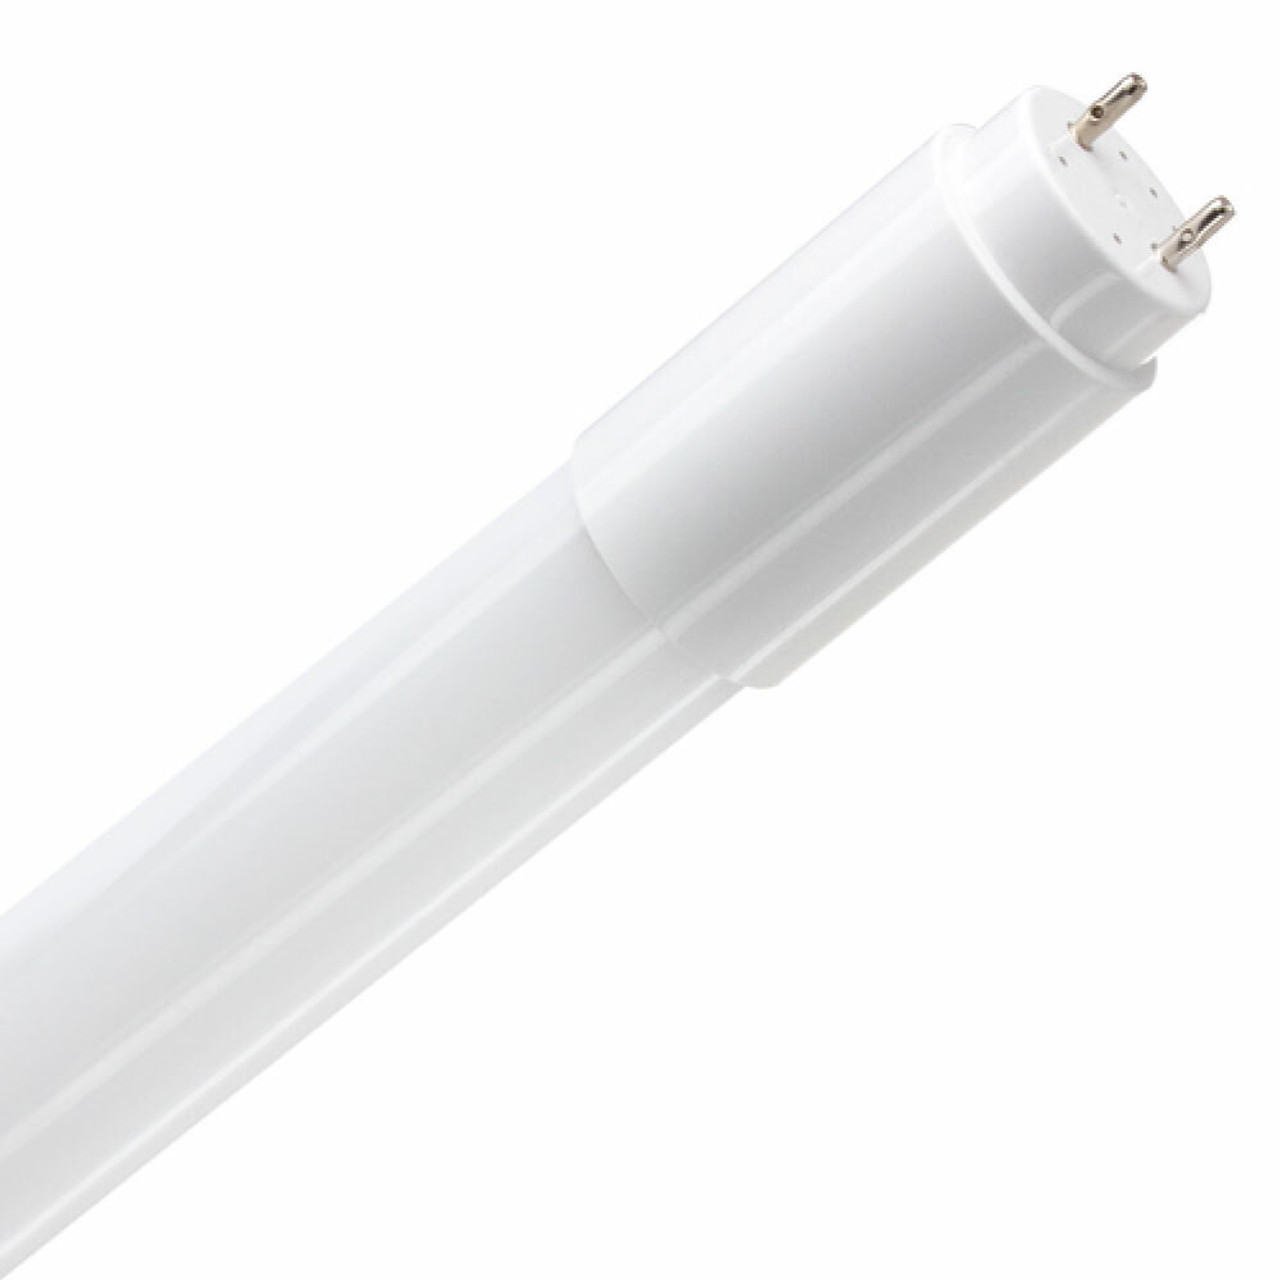 24 Inch T8 LED Hybrid Lamps, 8 Watt, 1000 Lumens, 3000K Soft White - Works  with existing electronic T8 ballasts or without ballasts, Clear Lens